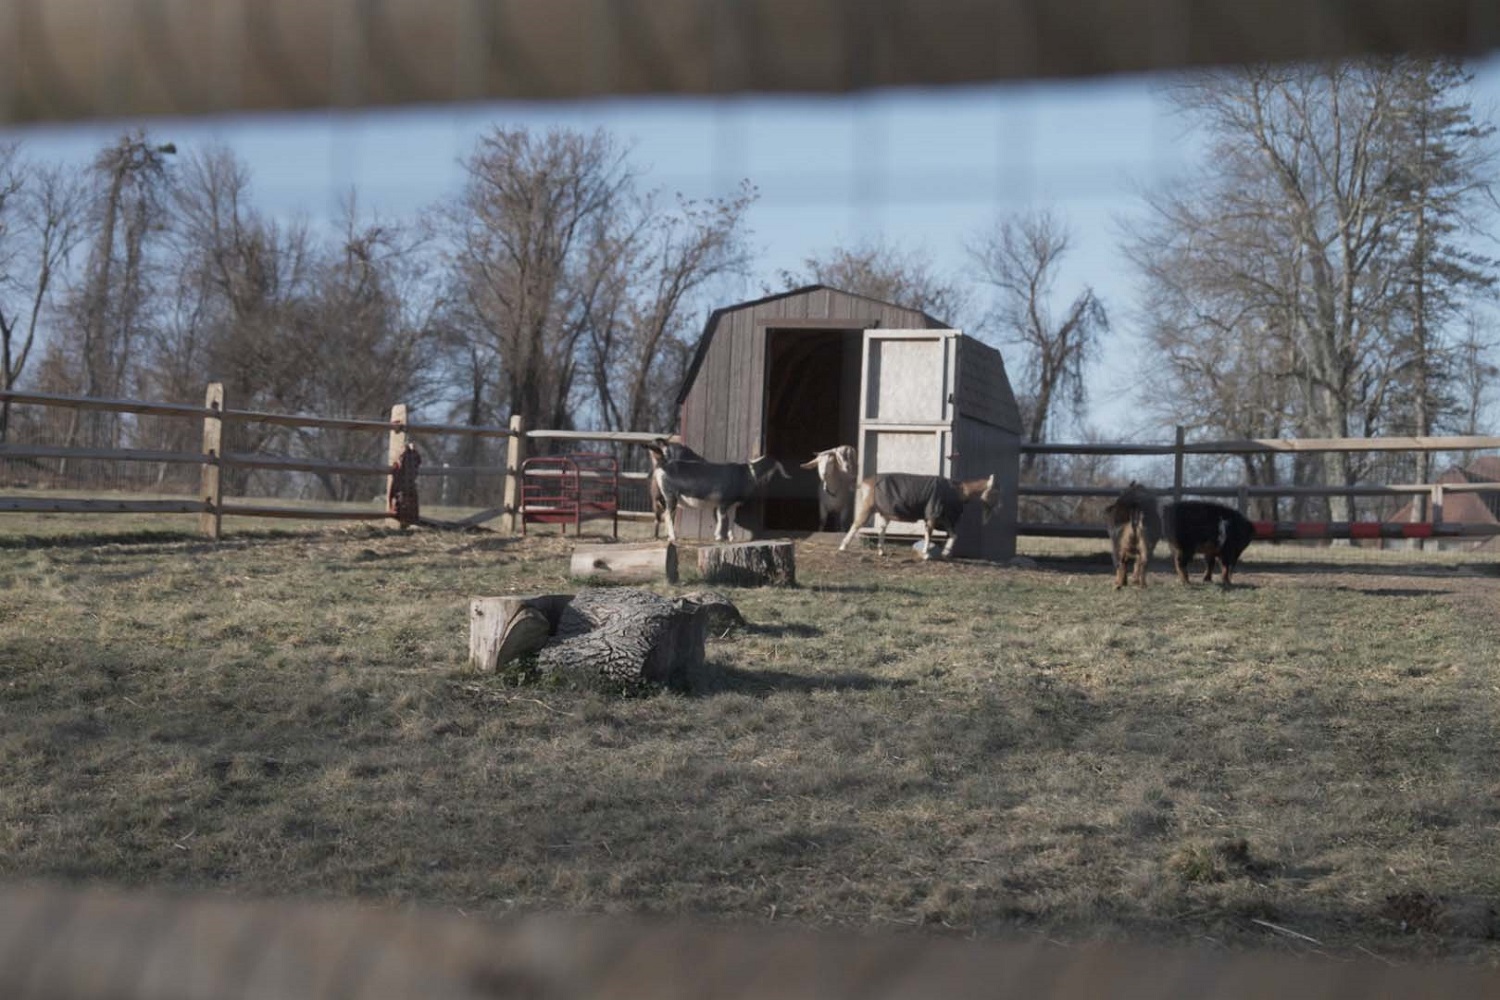 Illinois school districts sent kids to for-profit out-of-state facility: view of a farm with goats in a fenced-in enclosure